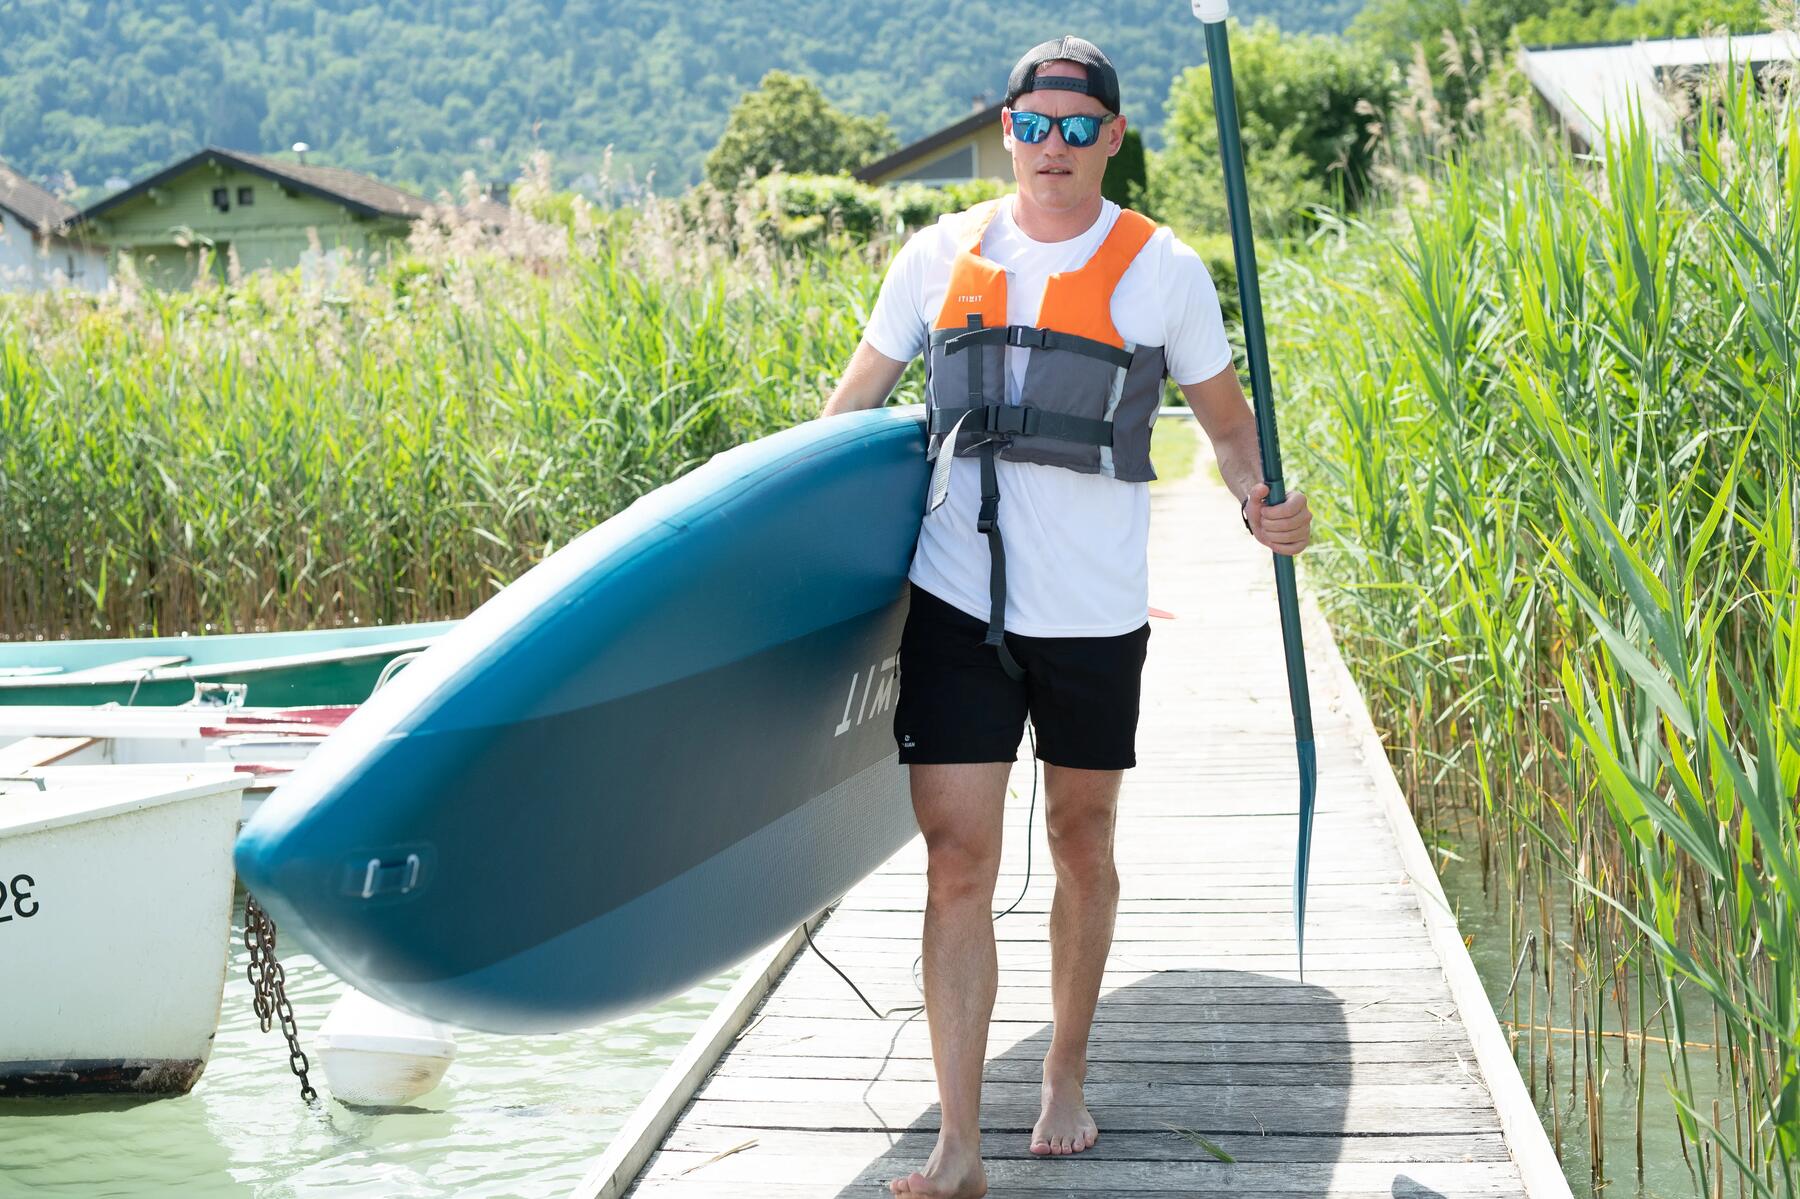 How to choose a stand-up paddle board (SUP)?